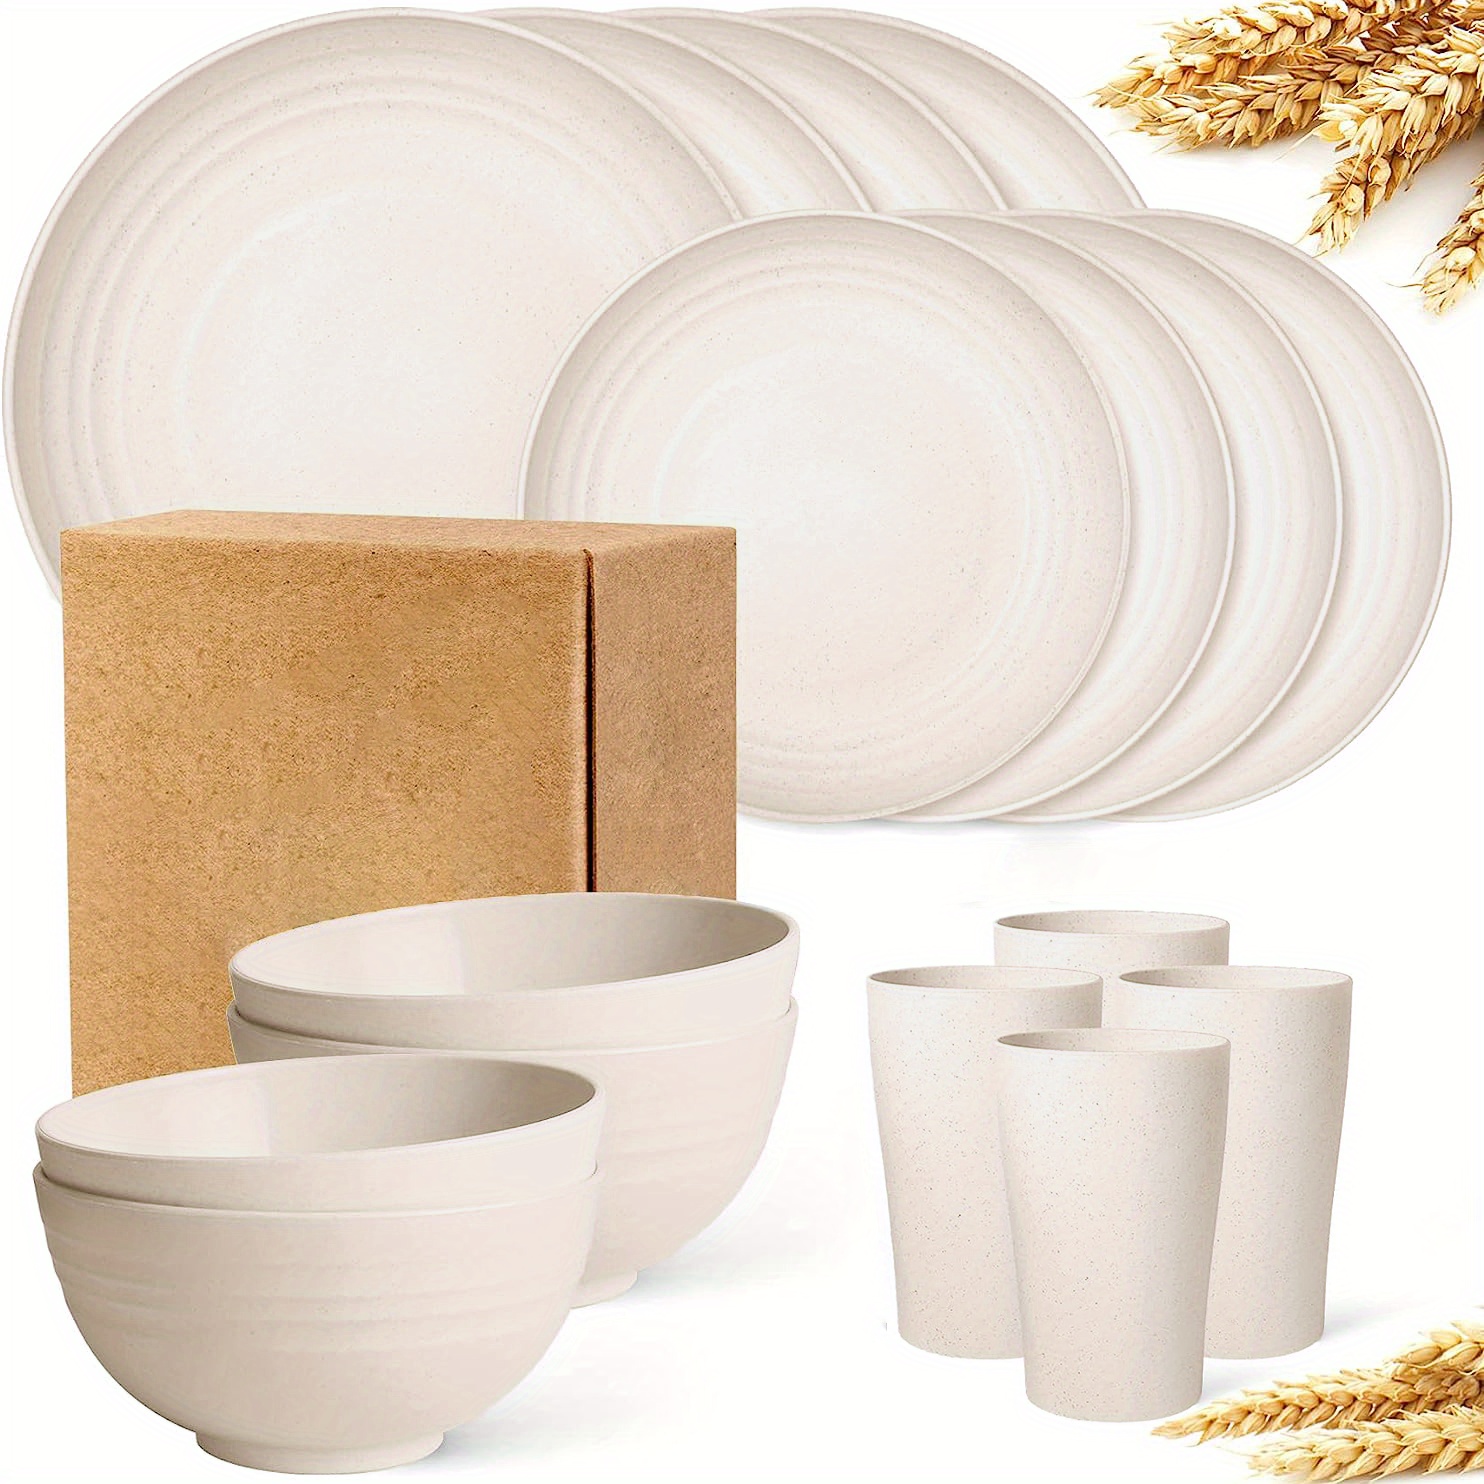 Wheat Straw Plates Set of 4 - Microwave Safe Dinner Plates